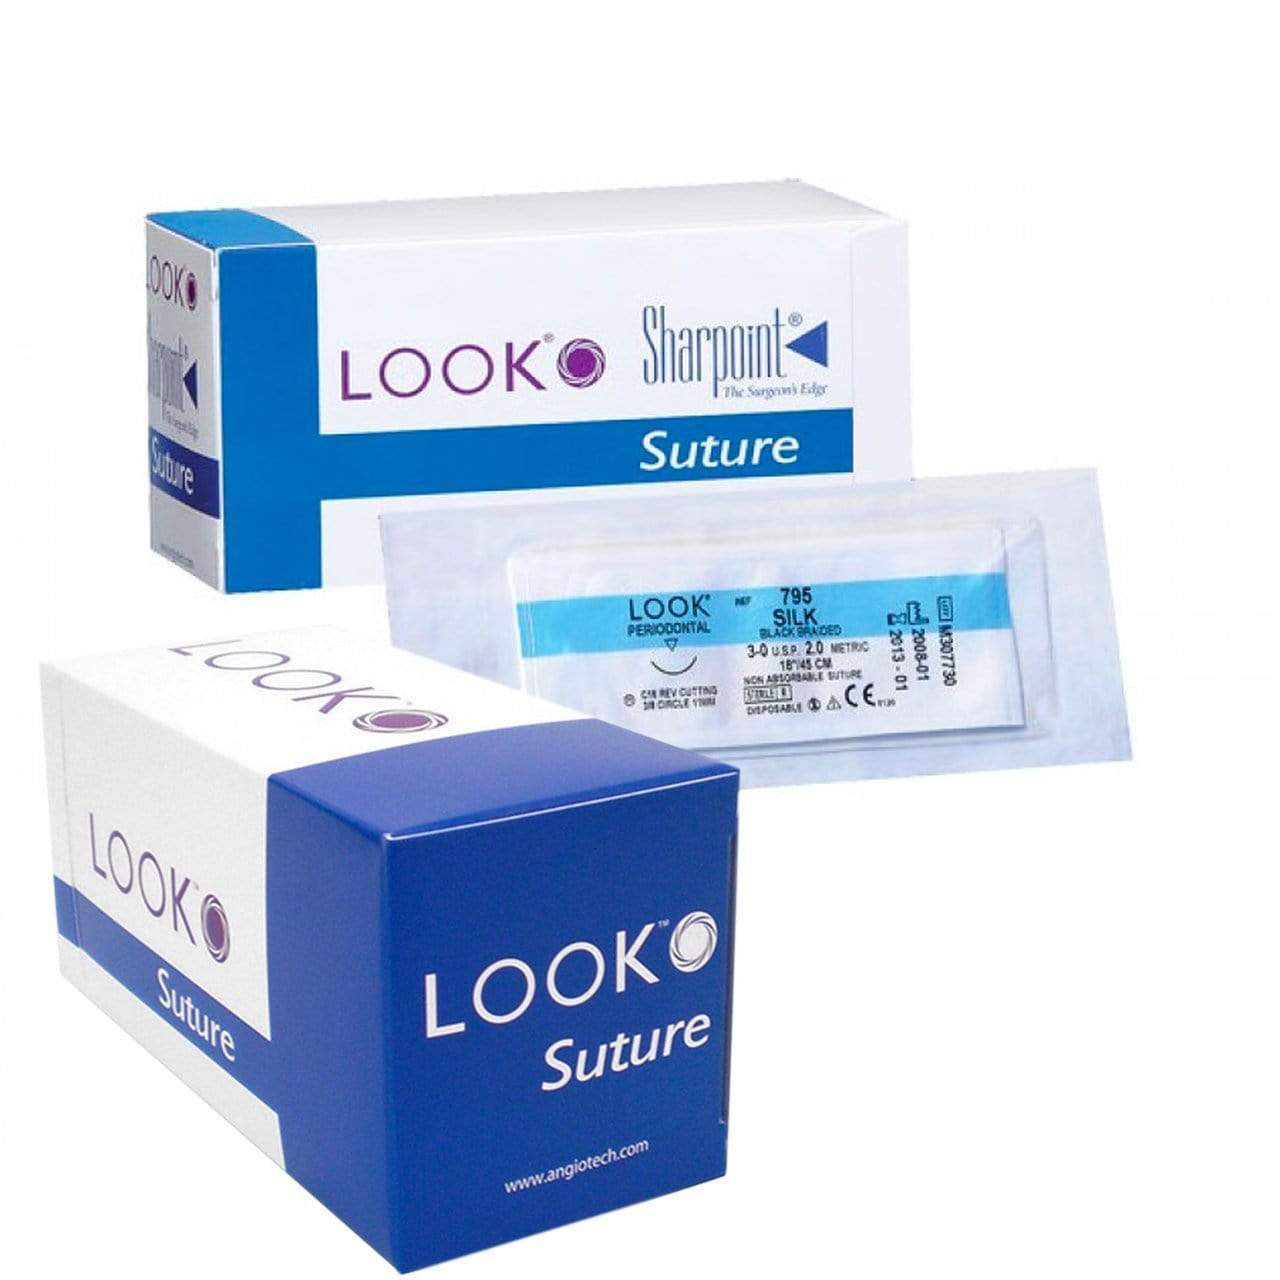 Look Sutures Sutures Sharpoint and LOOK Sutures